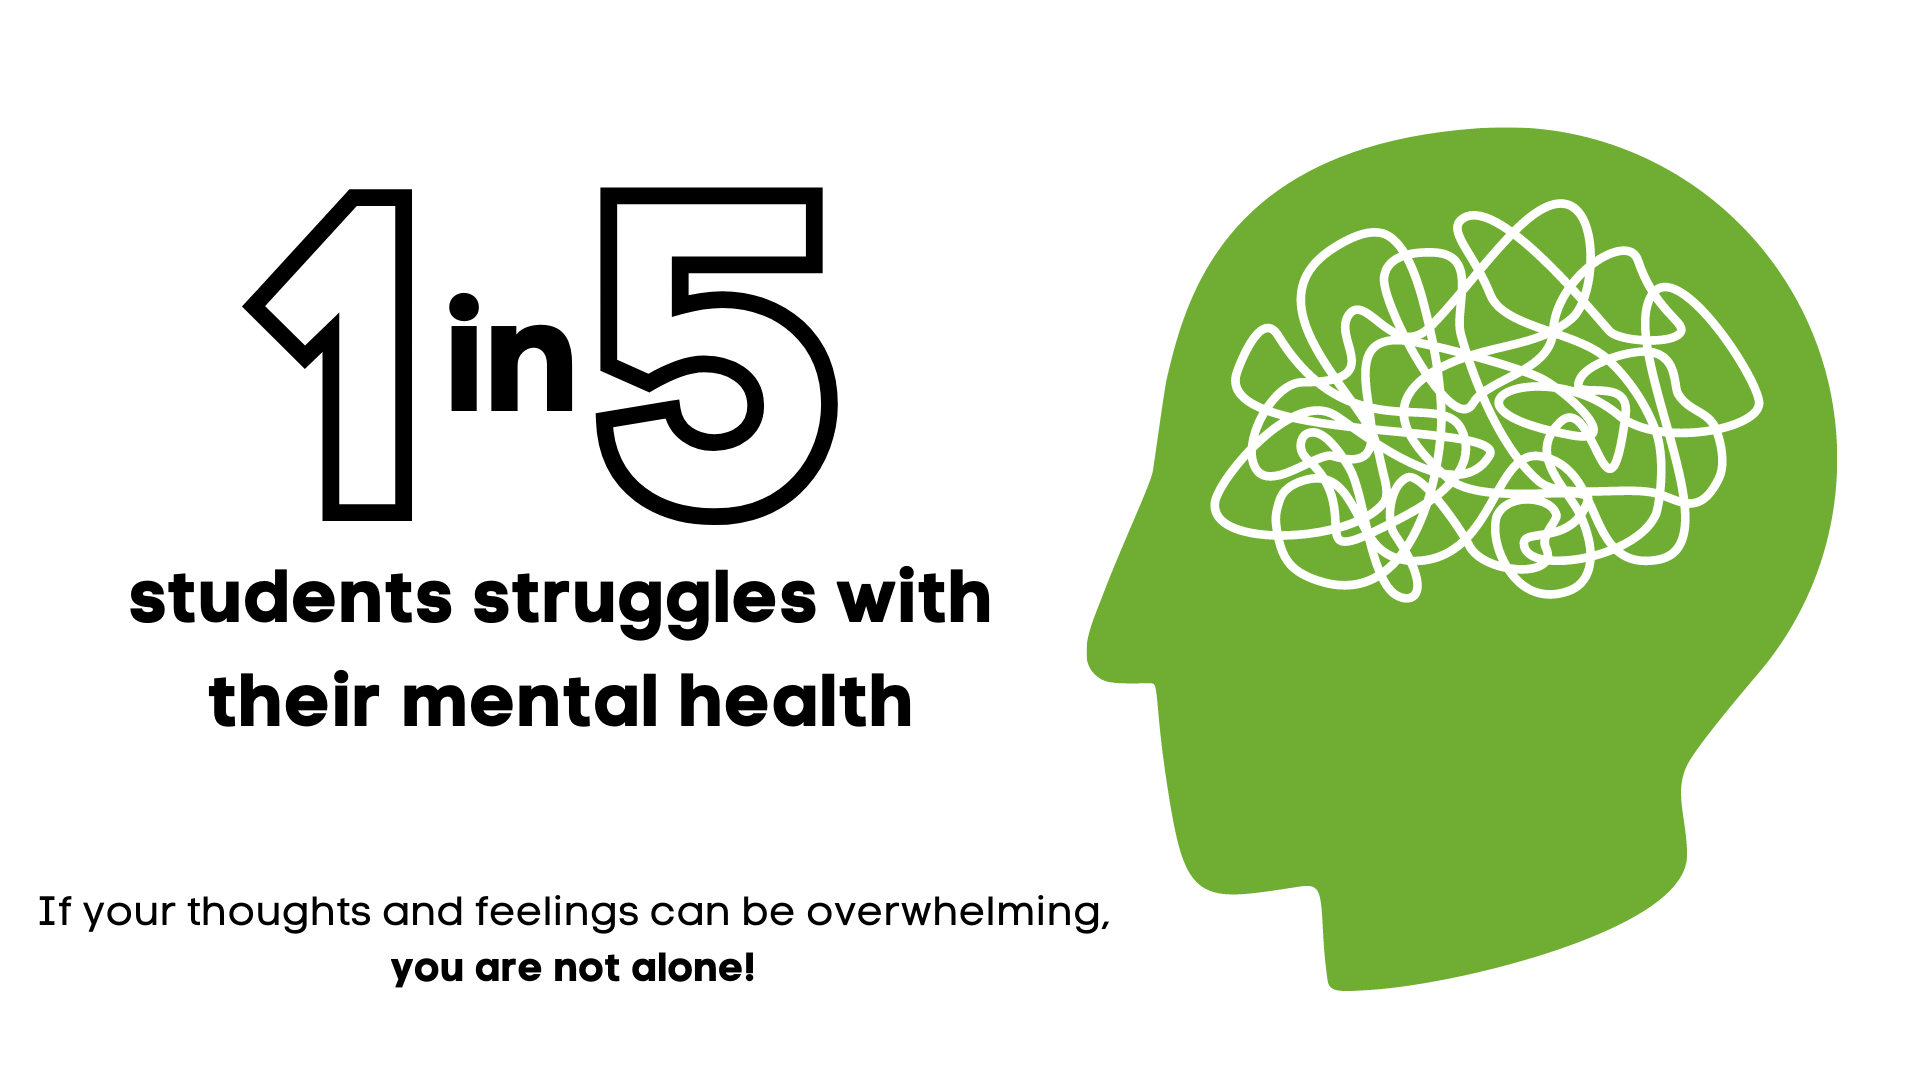 1 in 5 students struggles with their mental health